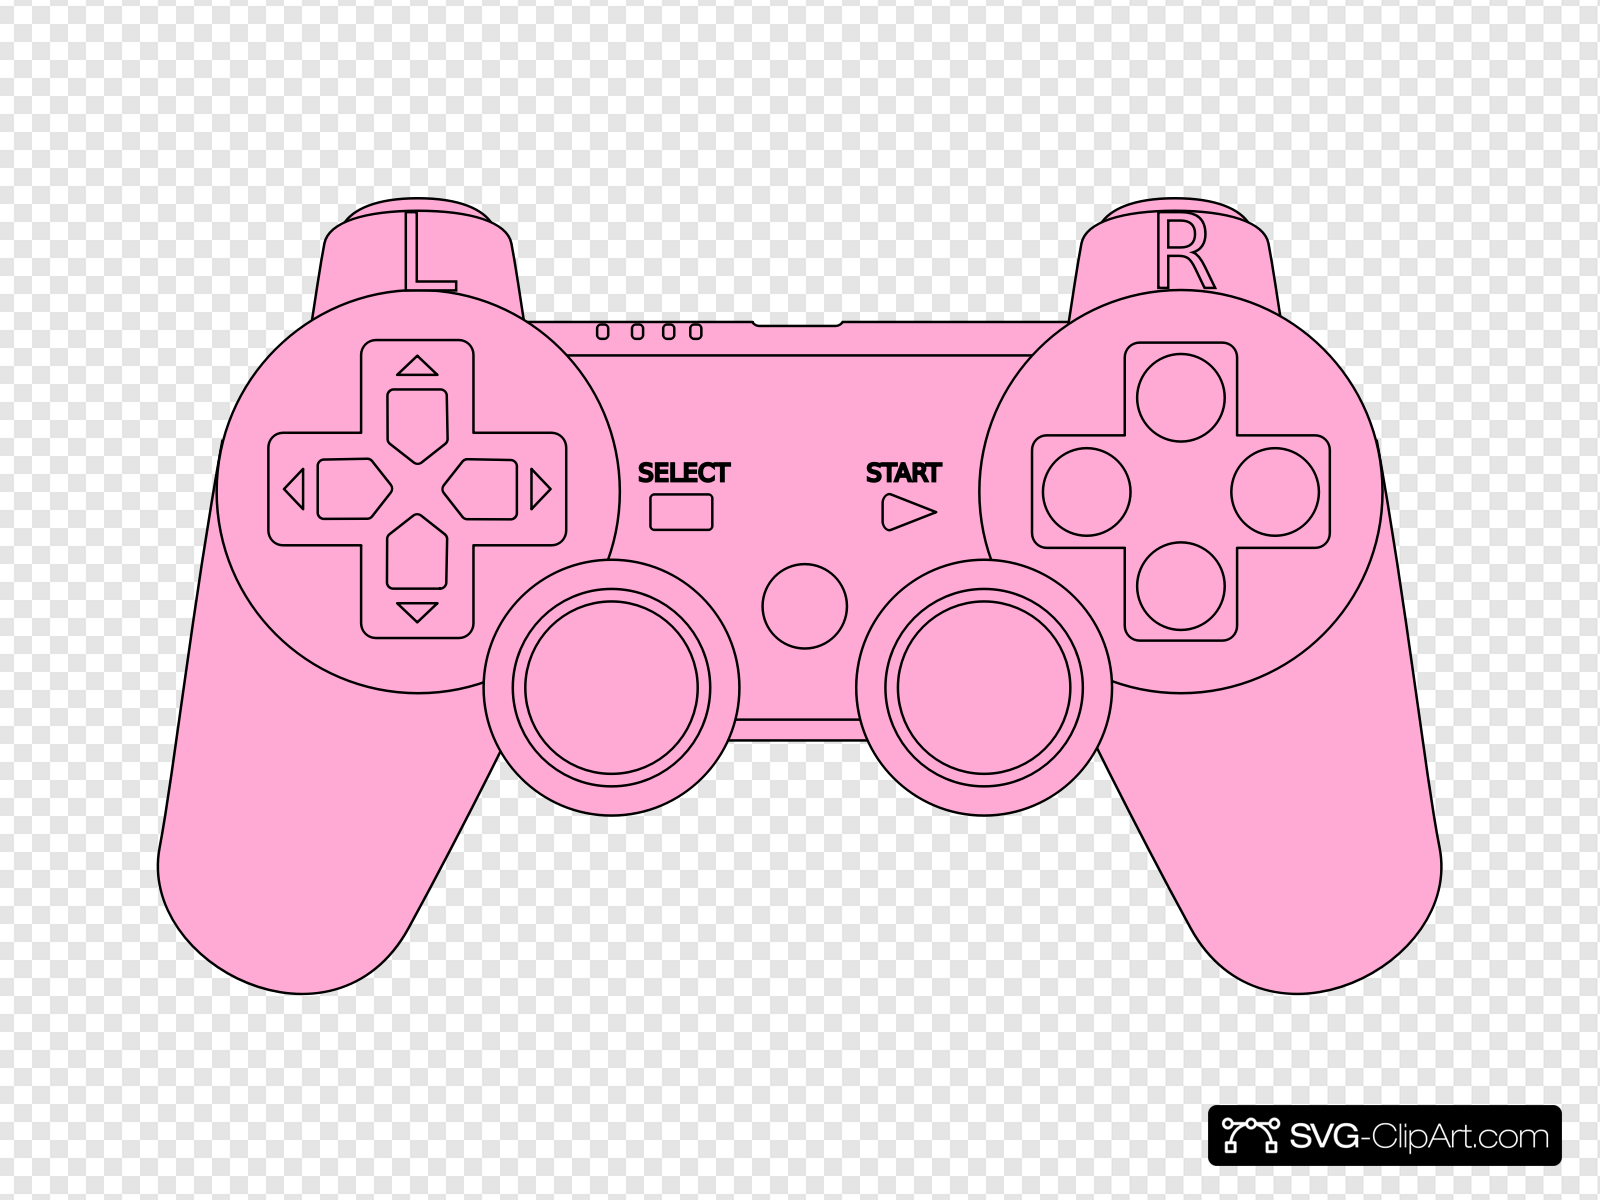 Controller clipart pink.